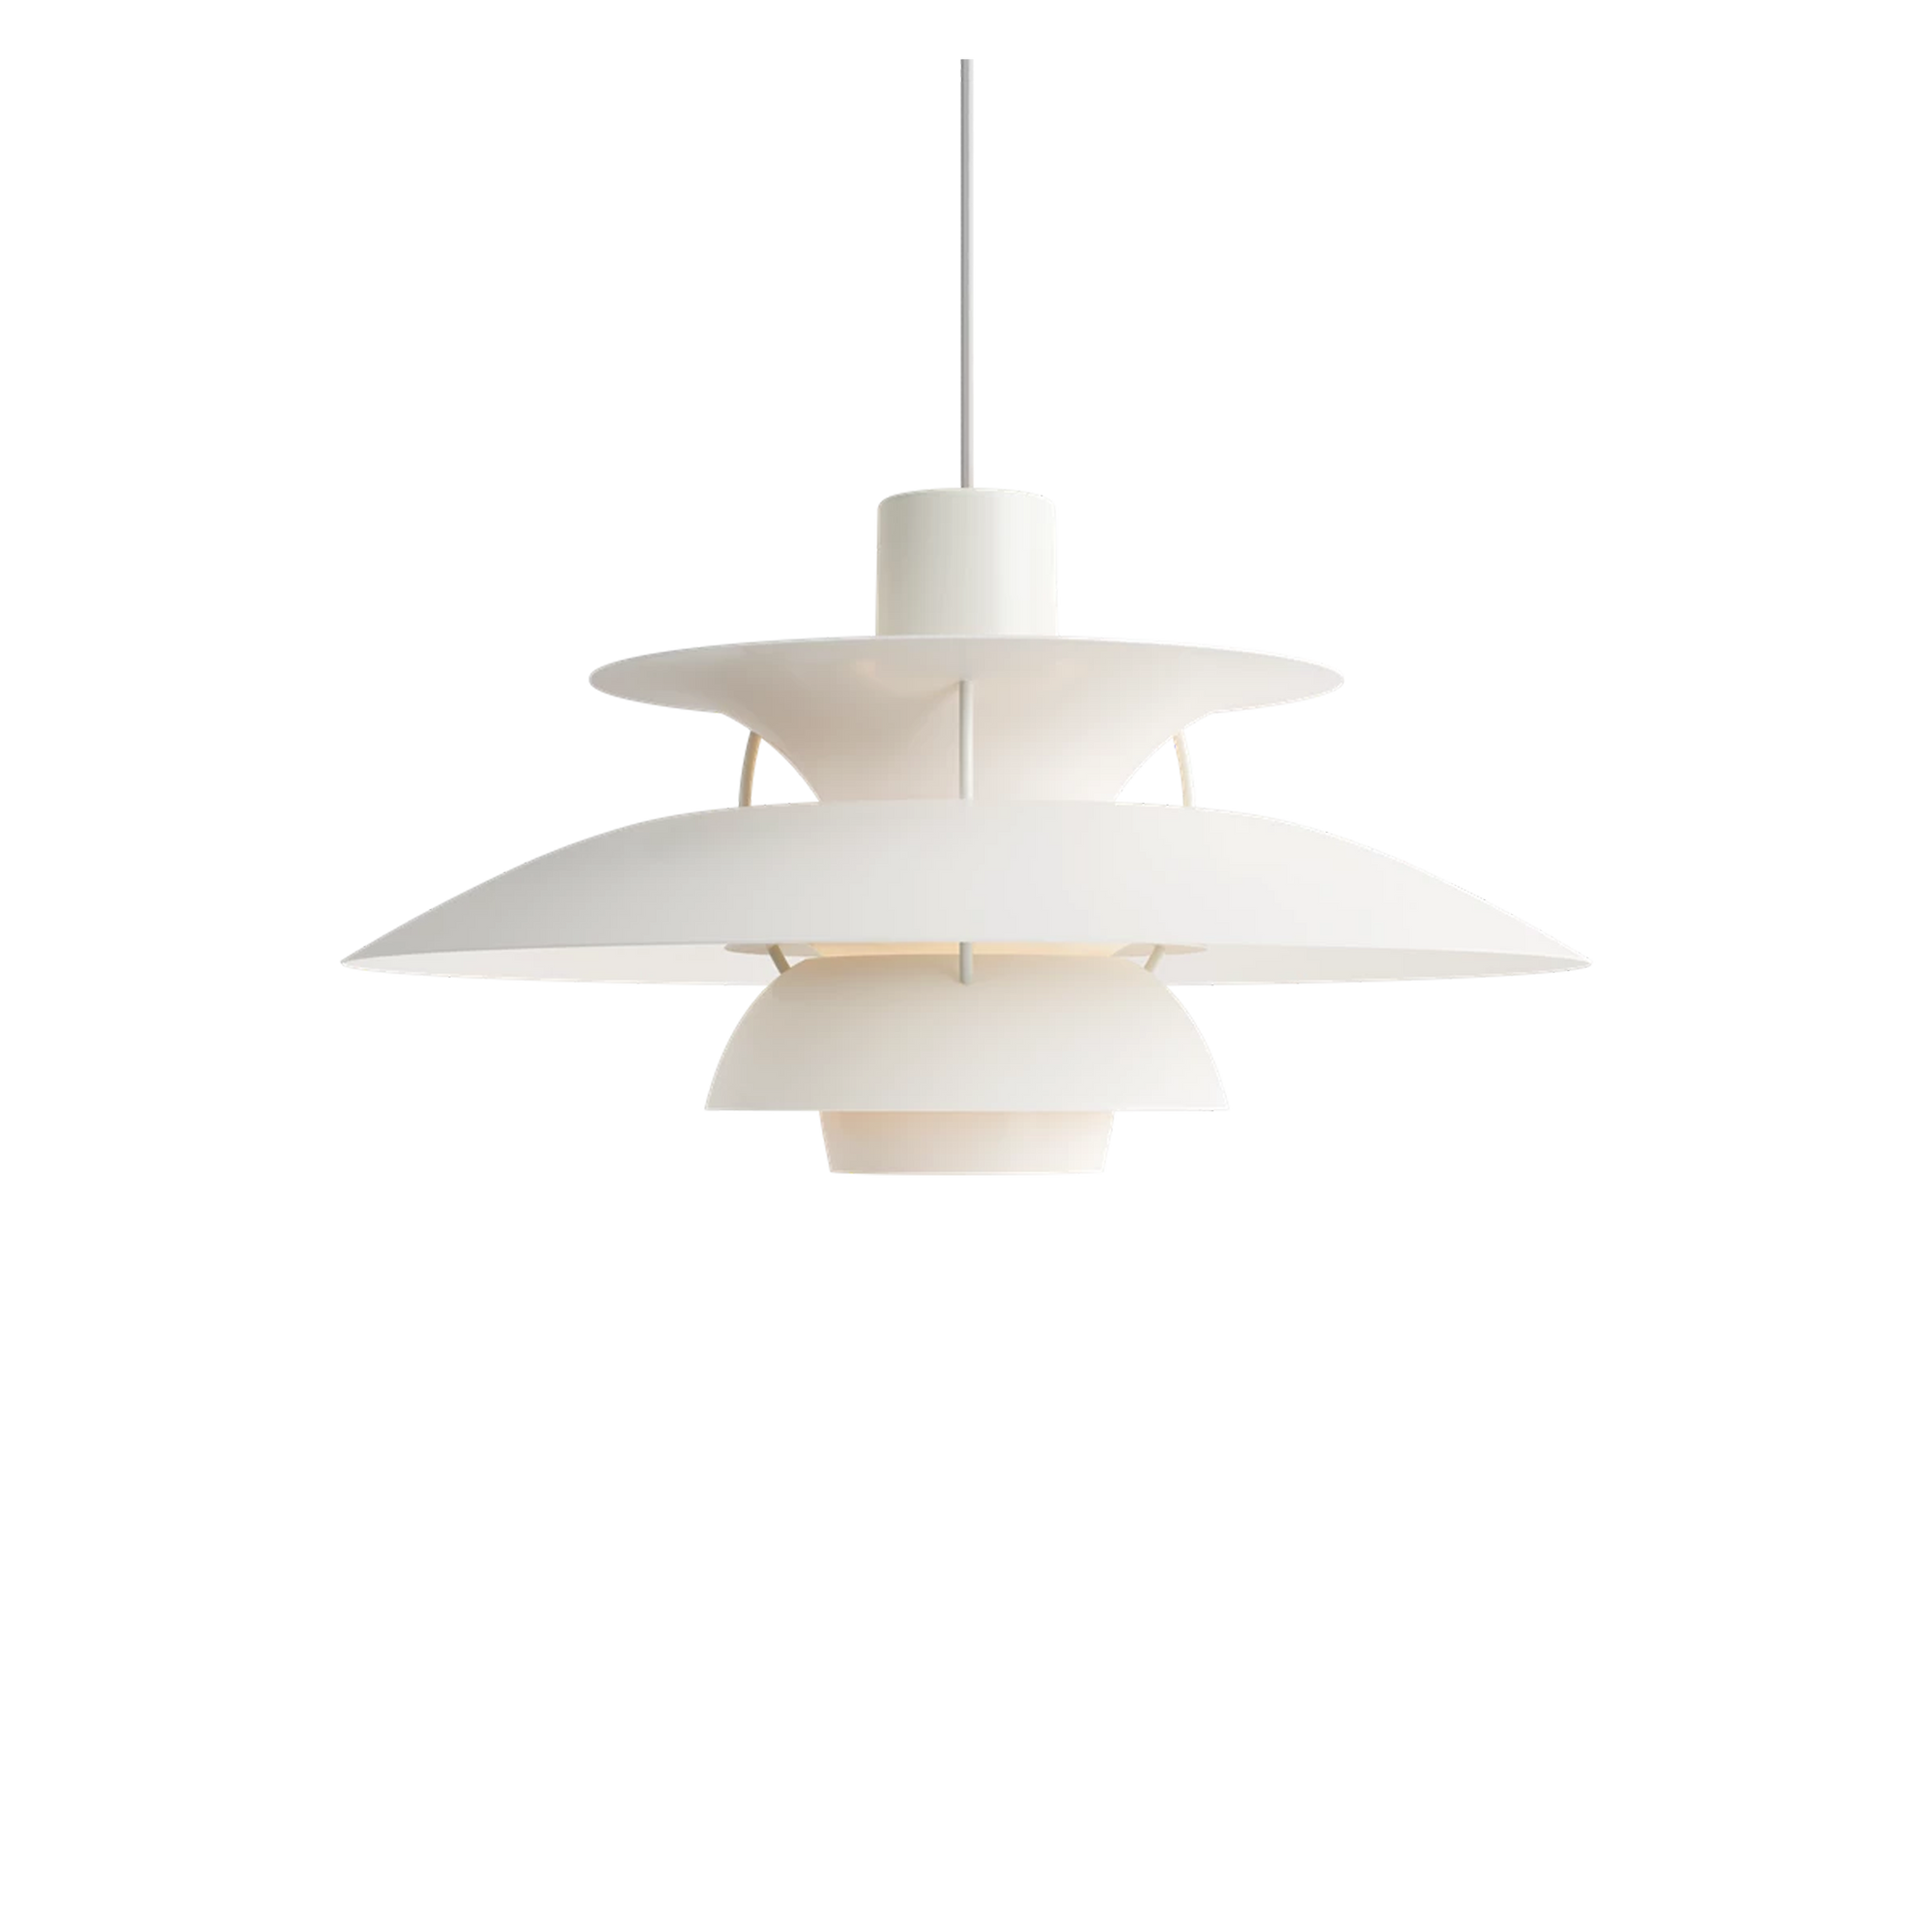 A beautiful sculptural element both when it is on and off, the PH 5 Pendant is a much-loved and well-known fixture design found in many spaces around the world.